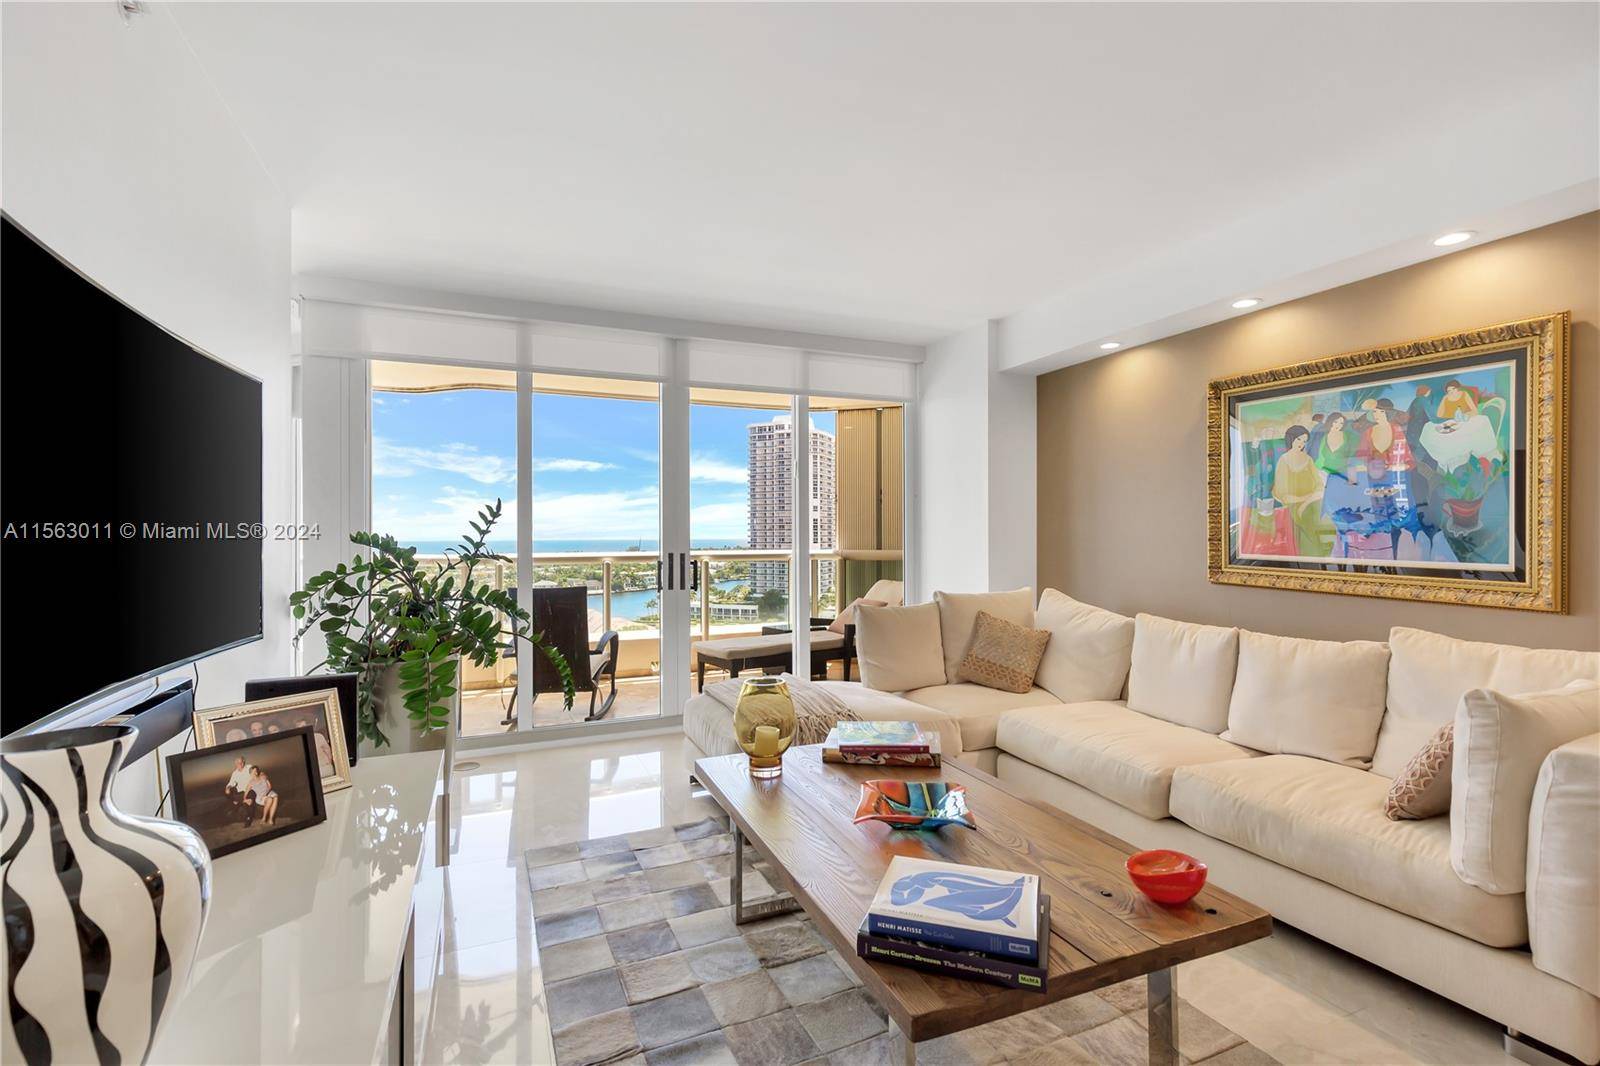 TURN KEY UPDATED 2 BEDROOM DEN UNIT WITH A MAGNIFICENT INTRACOASTAL AND OCEAN VIEWS FROM THE ENTIRE APARTMENT.